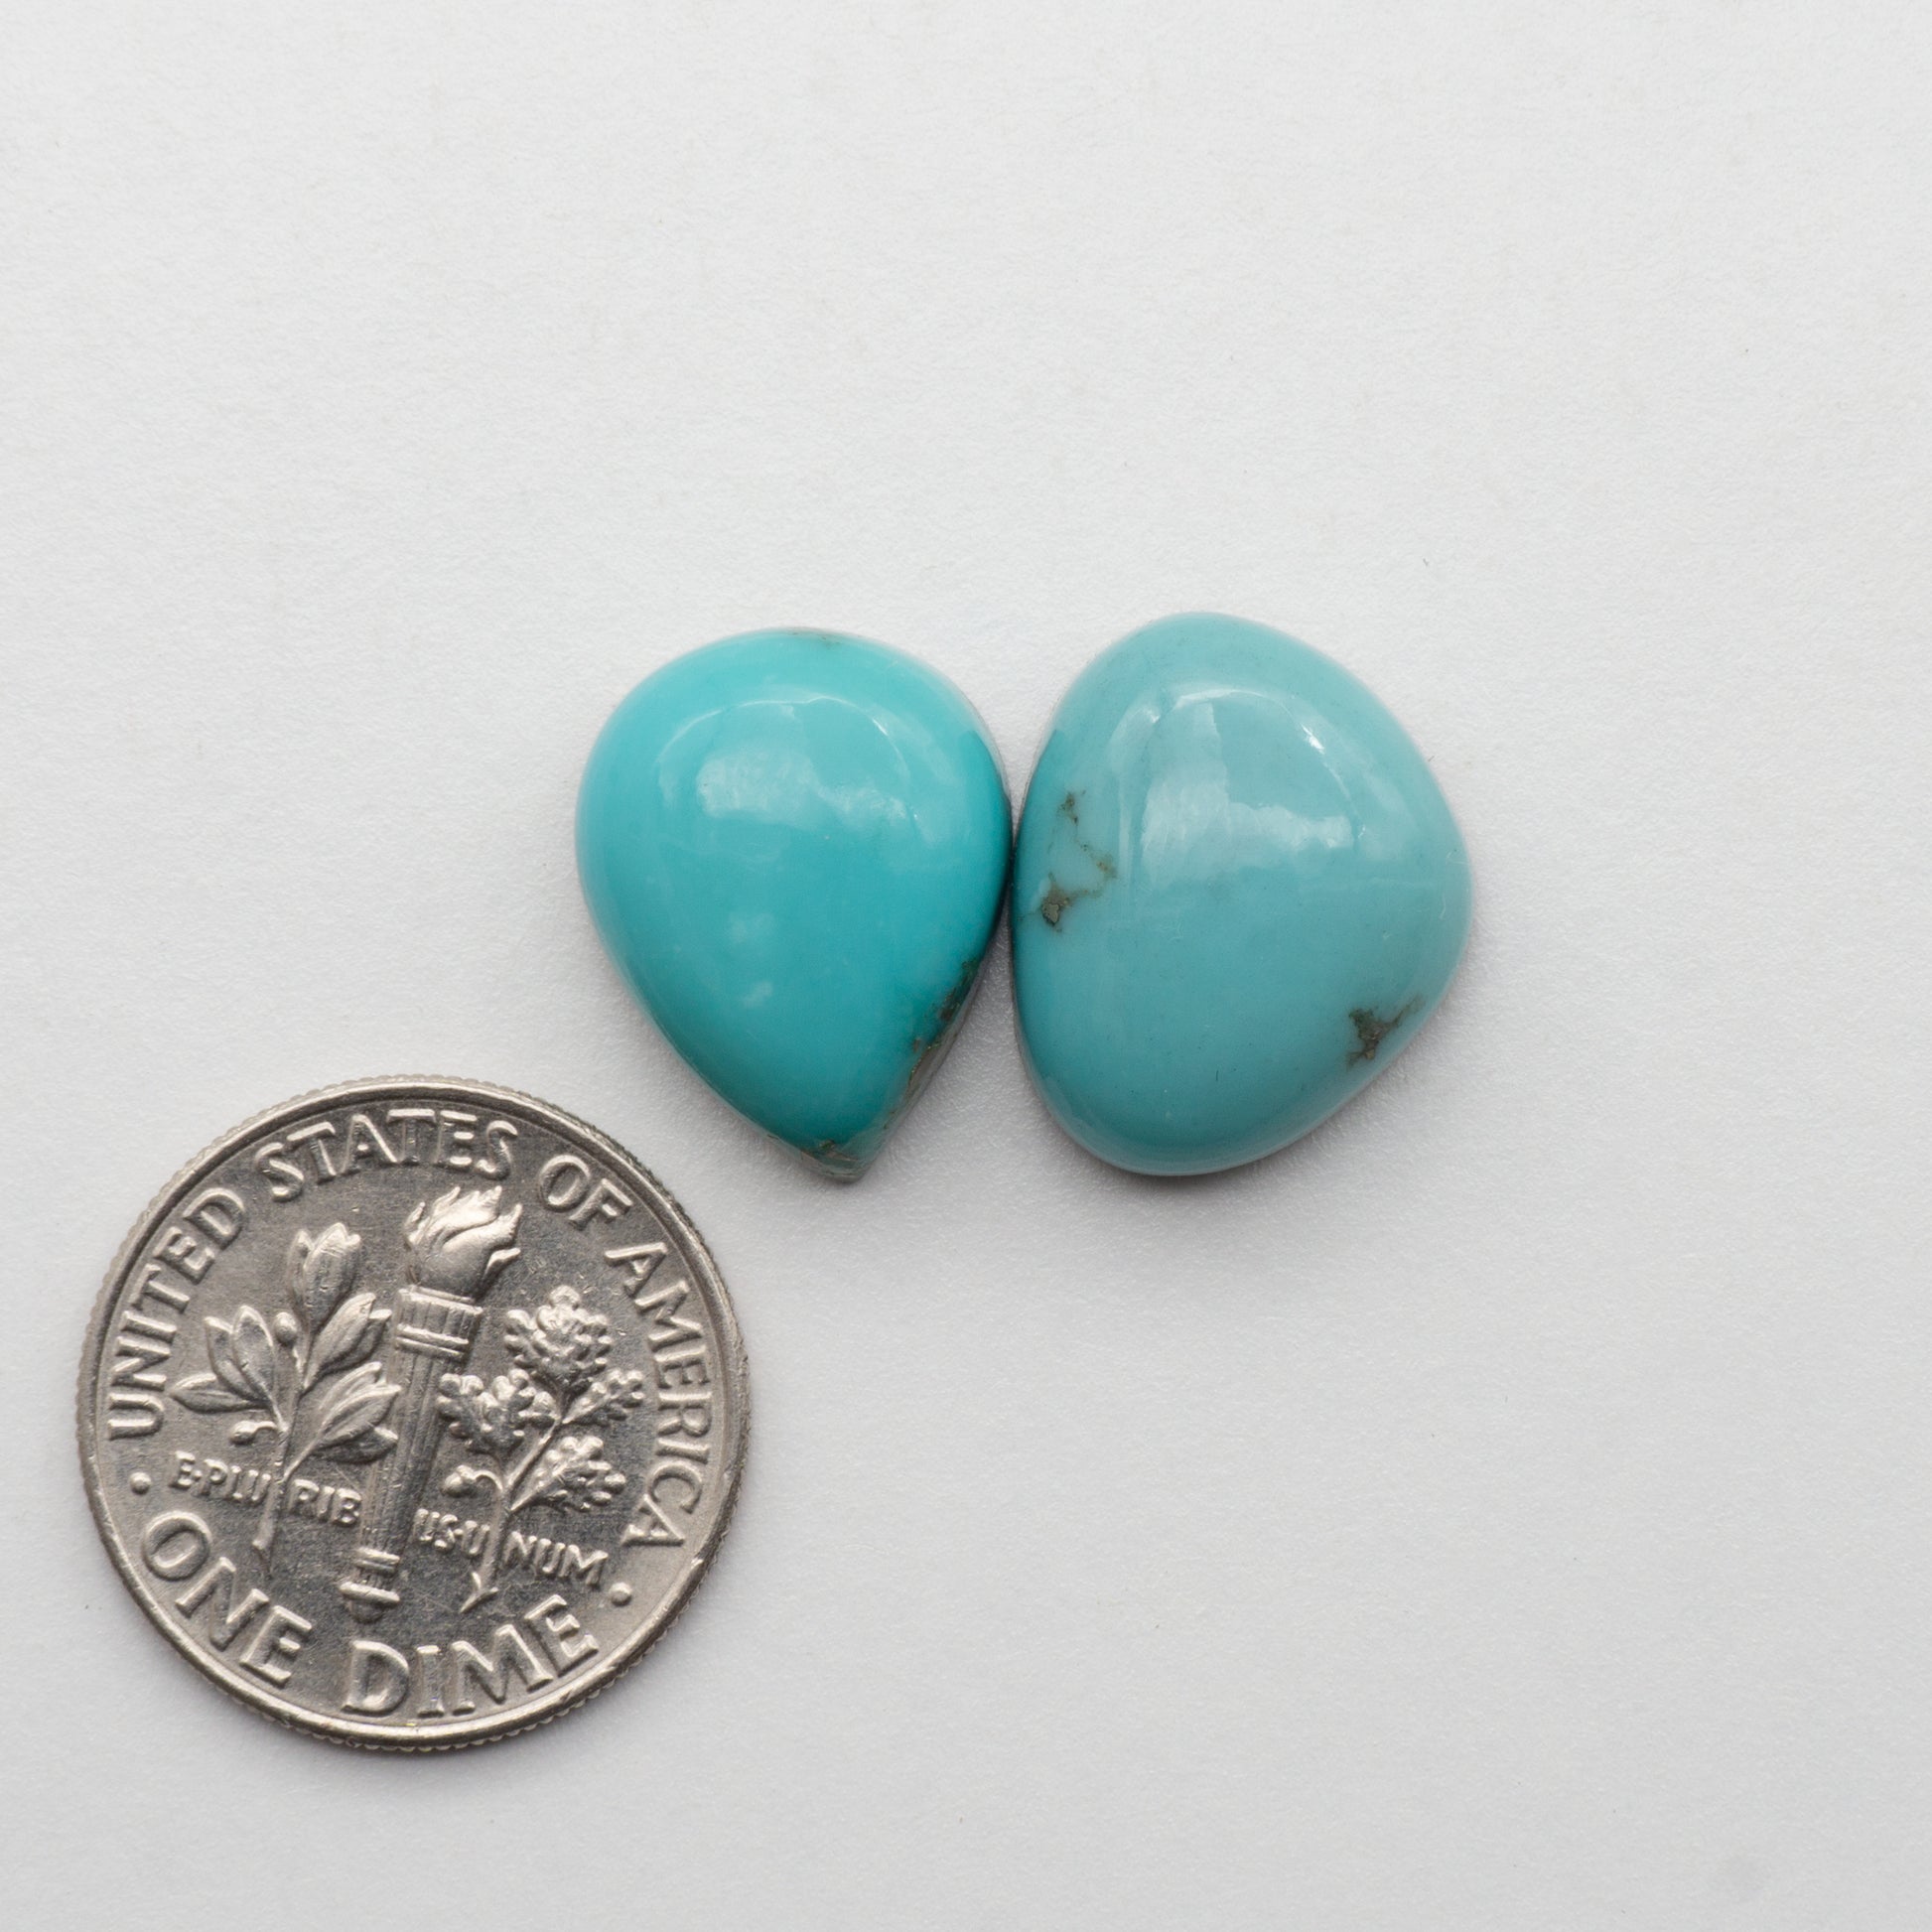 Campitos Turquoise Cabochons